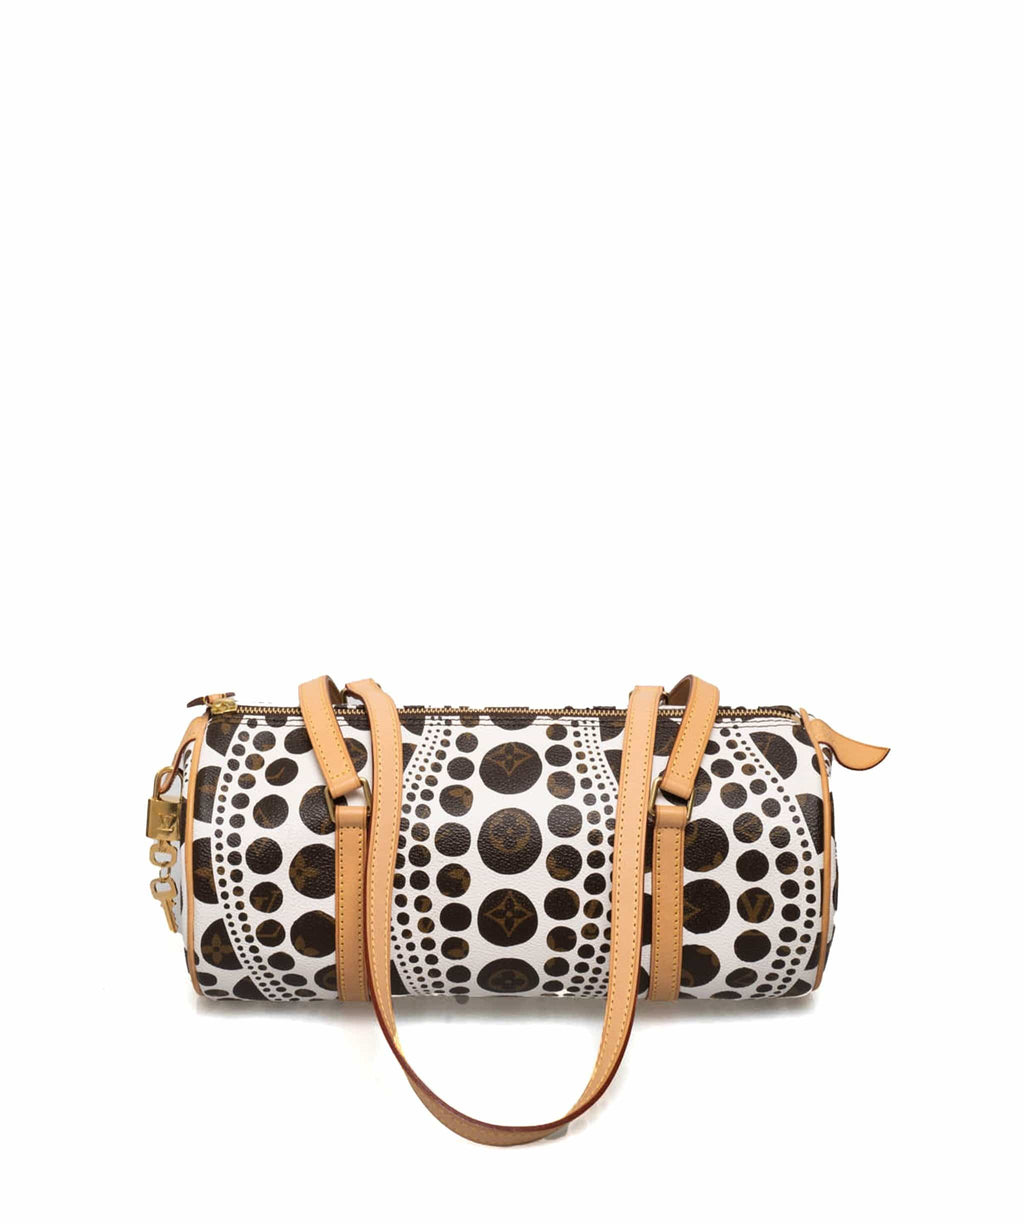 Louis Vuitton on X: Enchanted forms. Covered in #YayoiKusama's signature  infinity dots, the #LouisVuitton Alma showcases a pumpkin charm, a nod to  one of the artist's emblematic shapes. See more from #LVxYayoiKusama